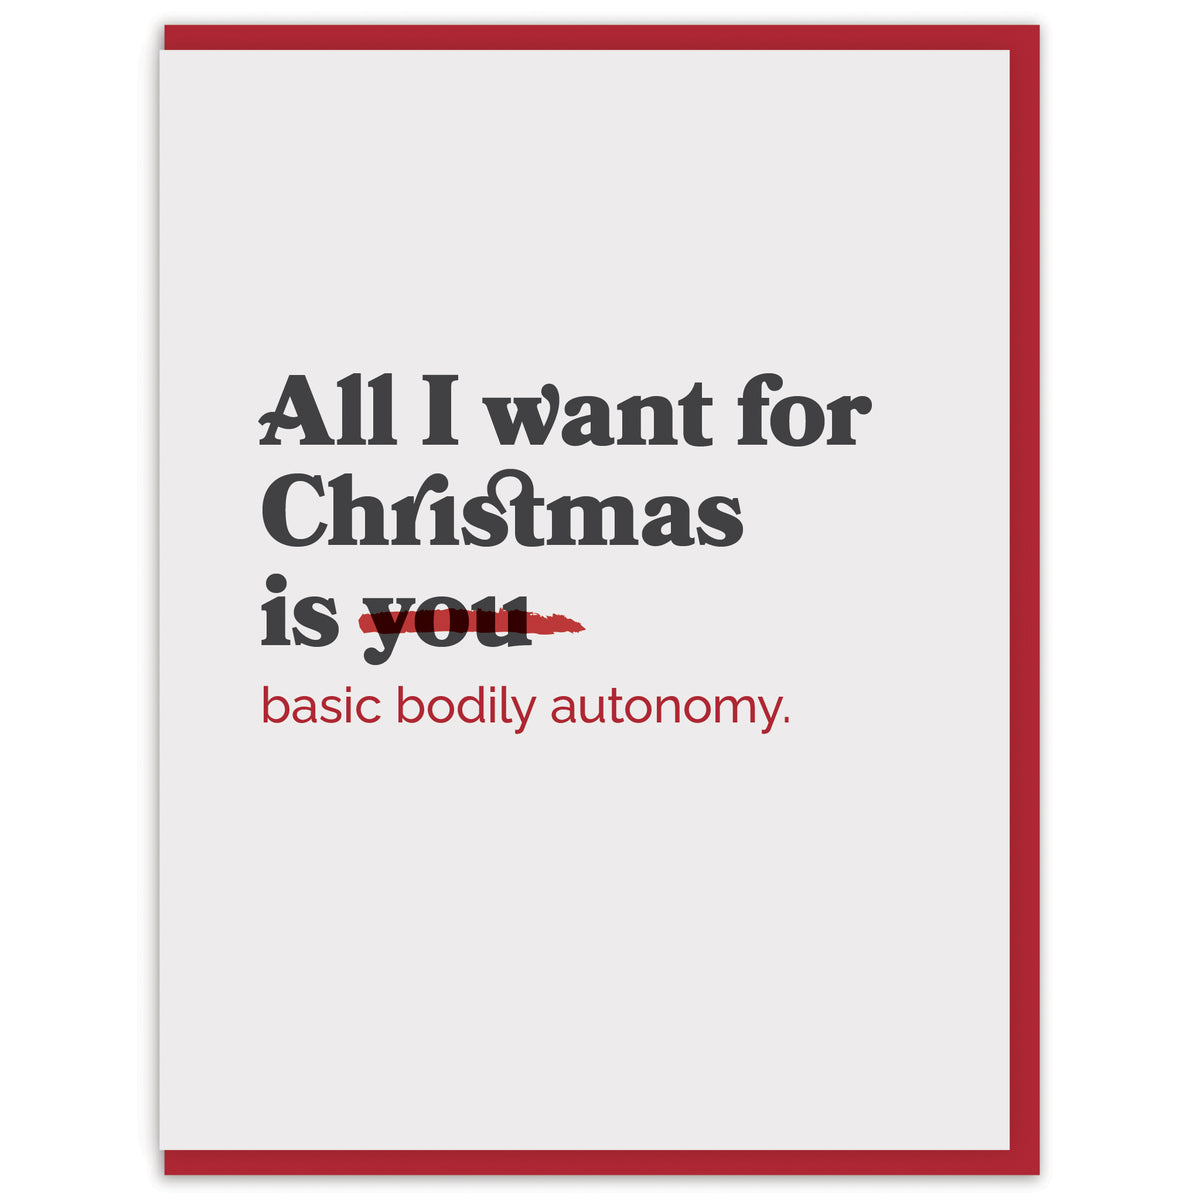 All I want for Christmas is basic bodily autonomy.